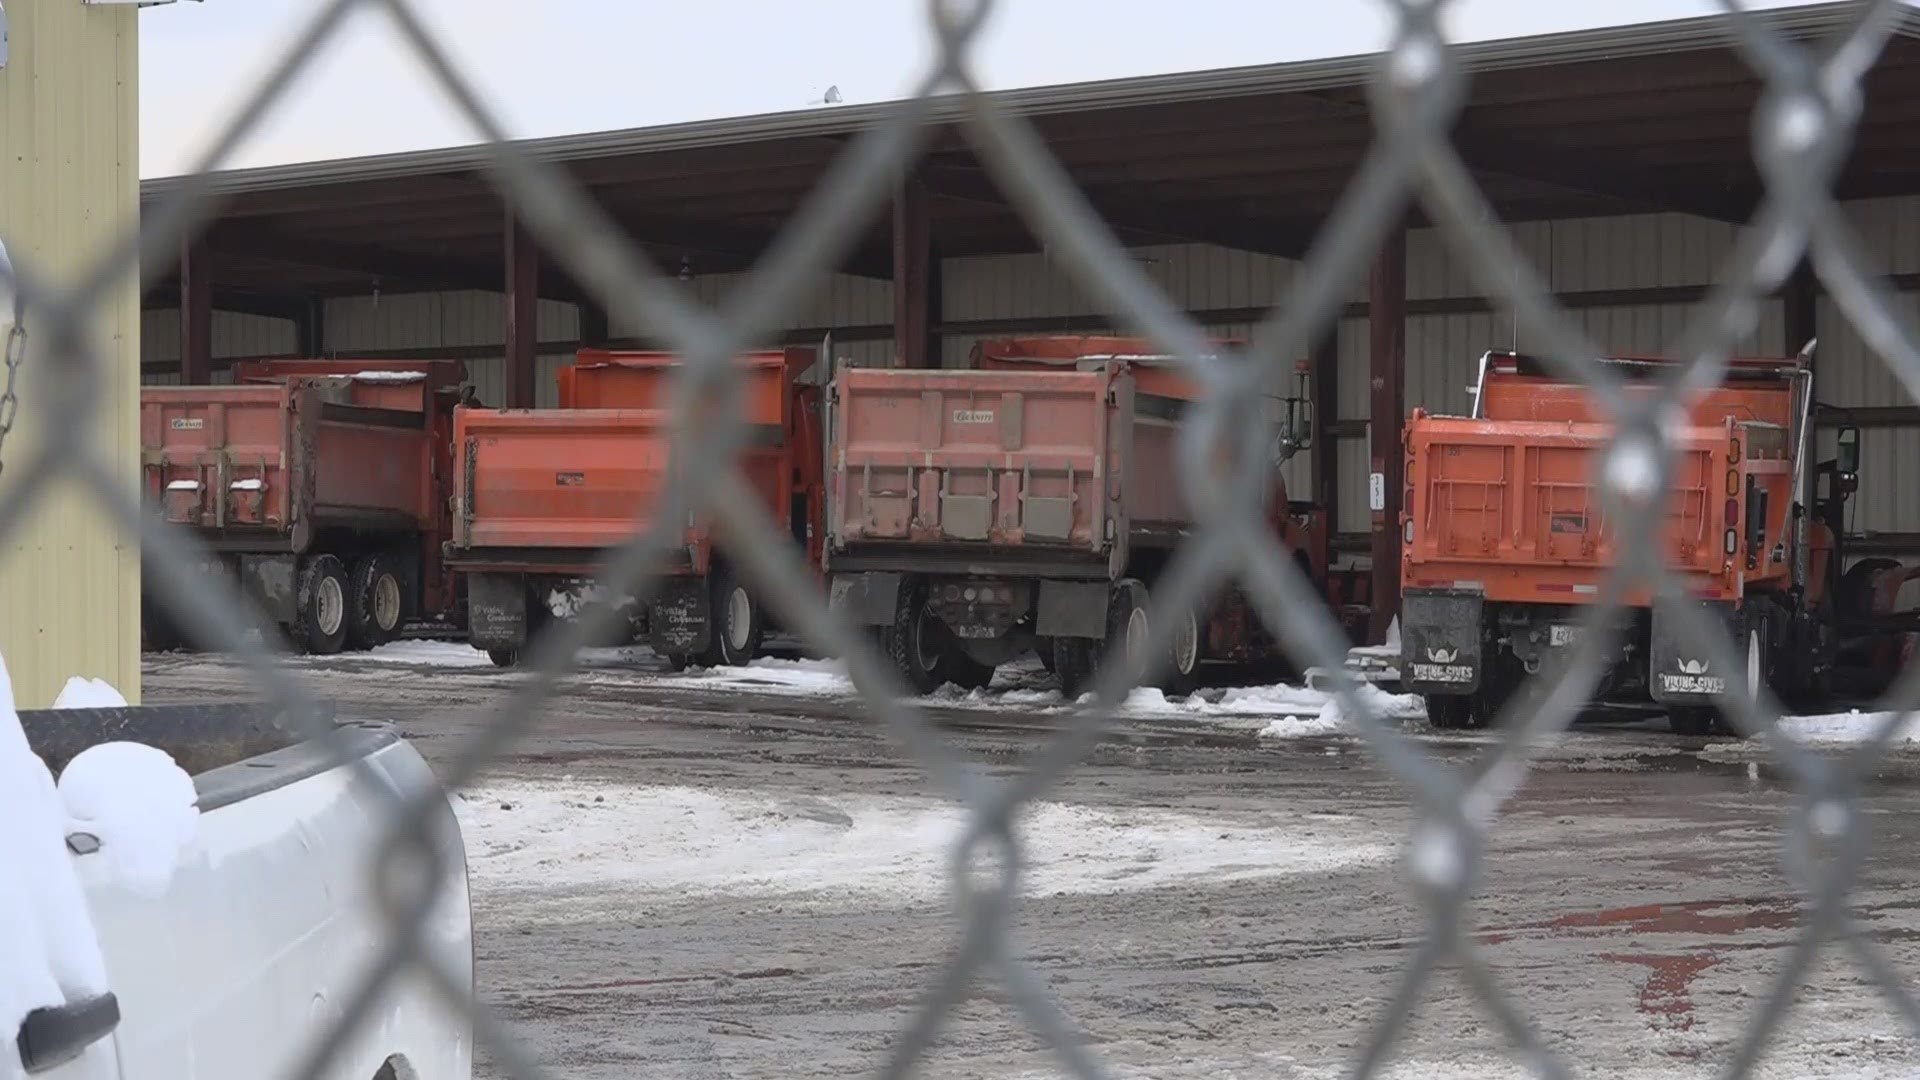 The city of Bangor is finishing snow clean-up after Saturday's storm.